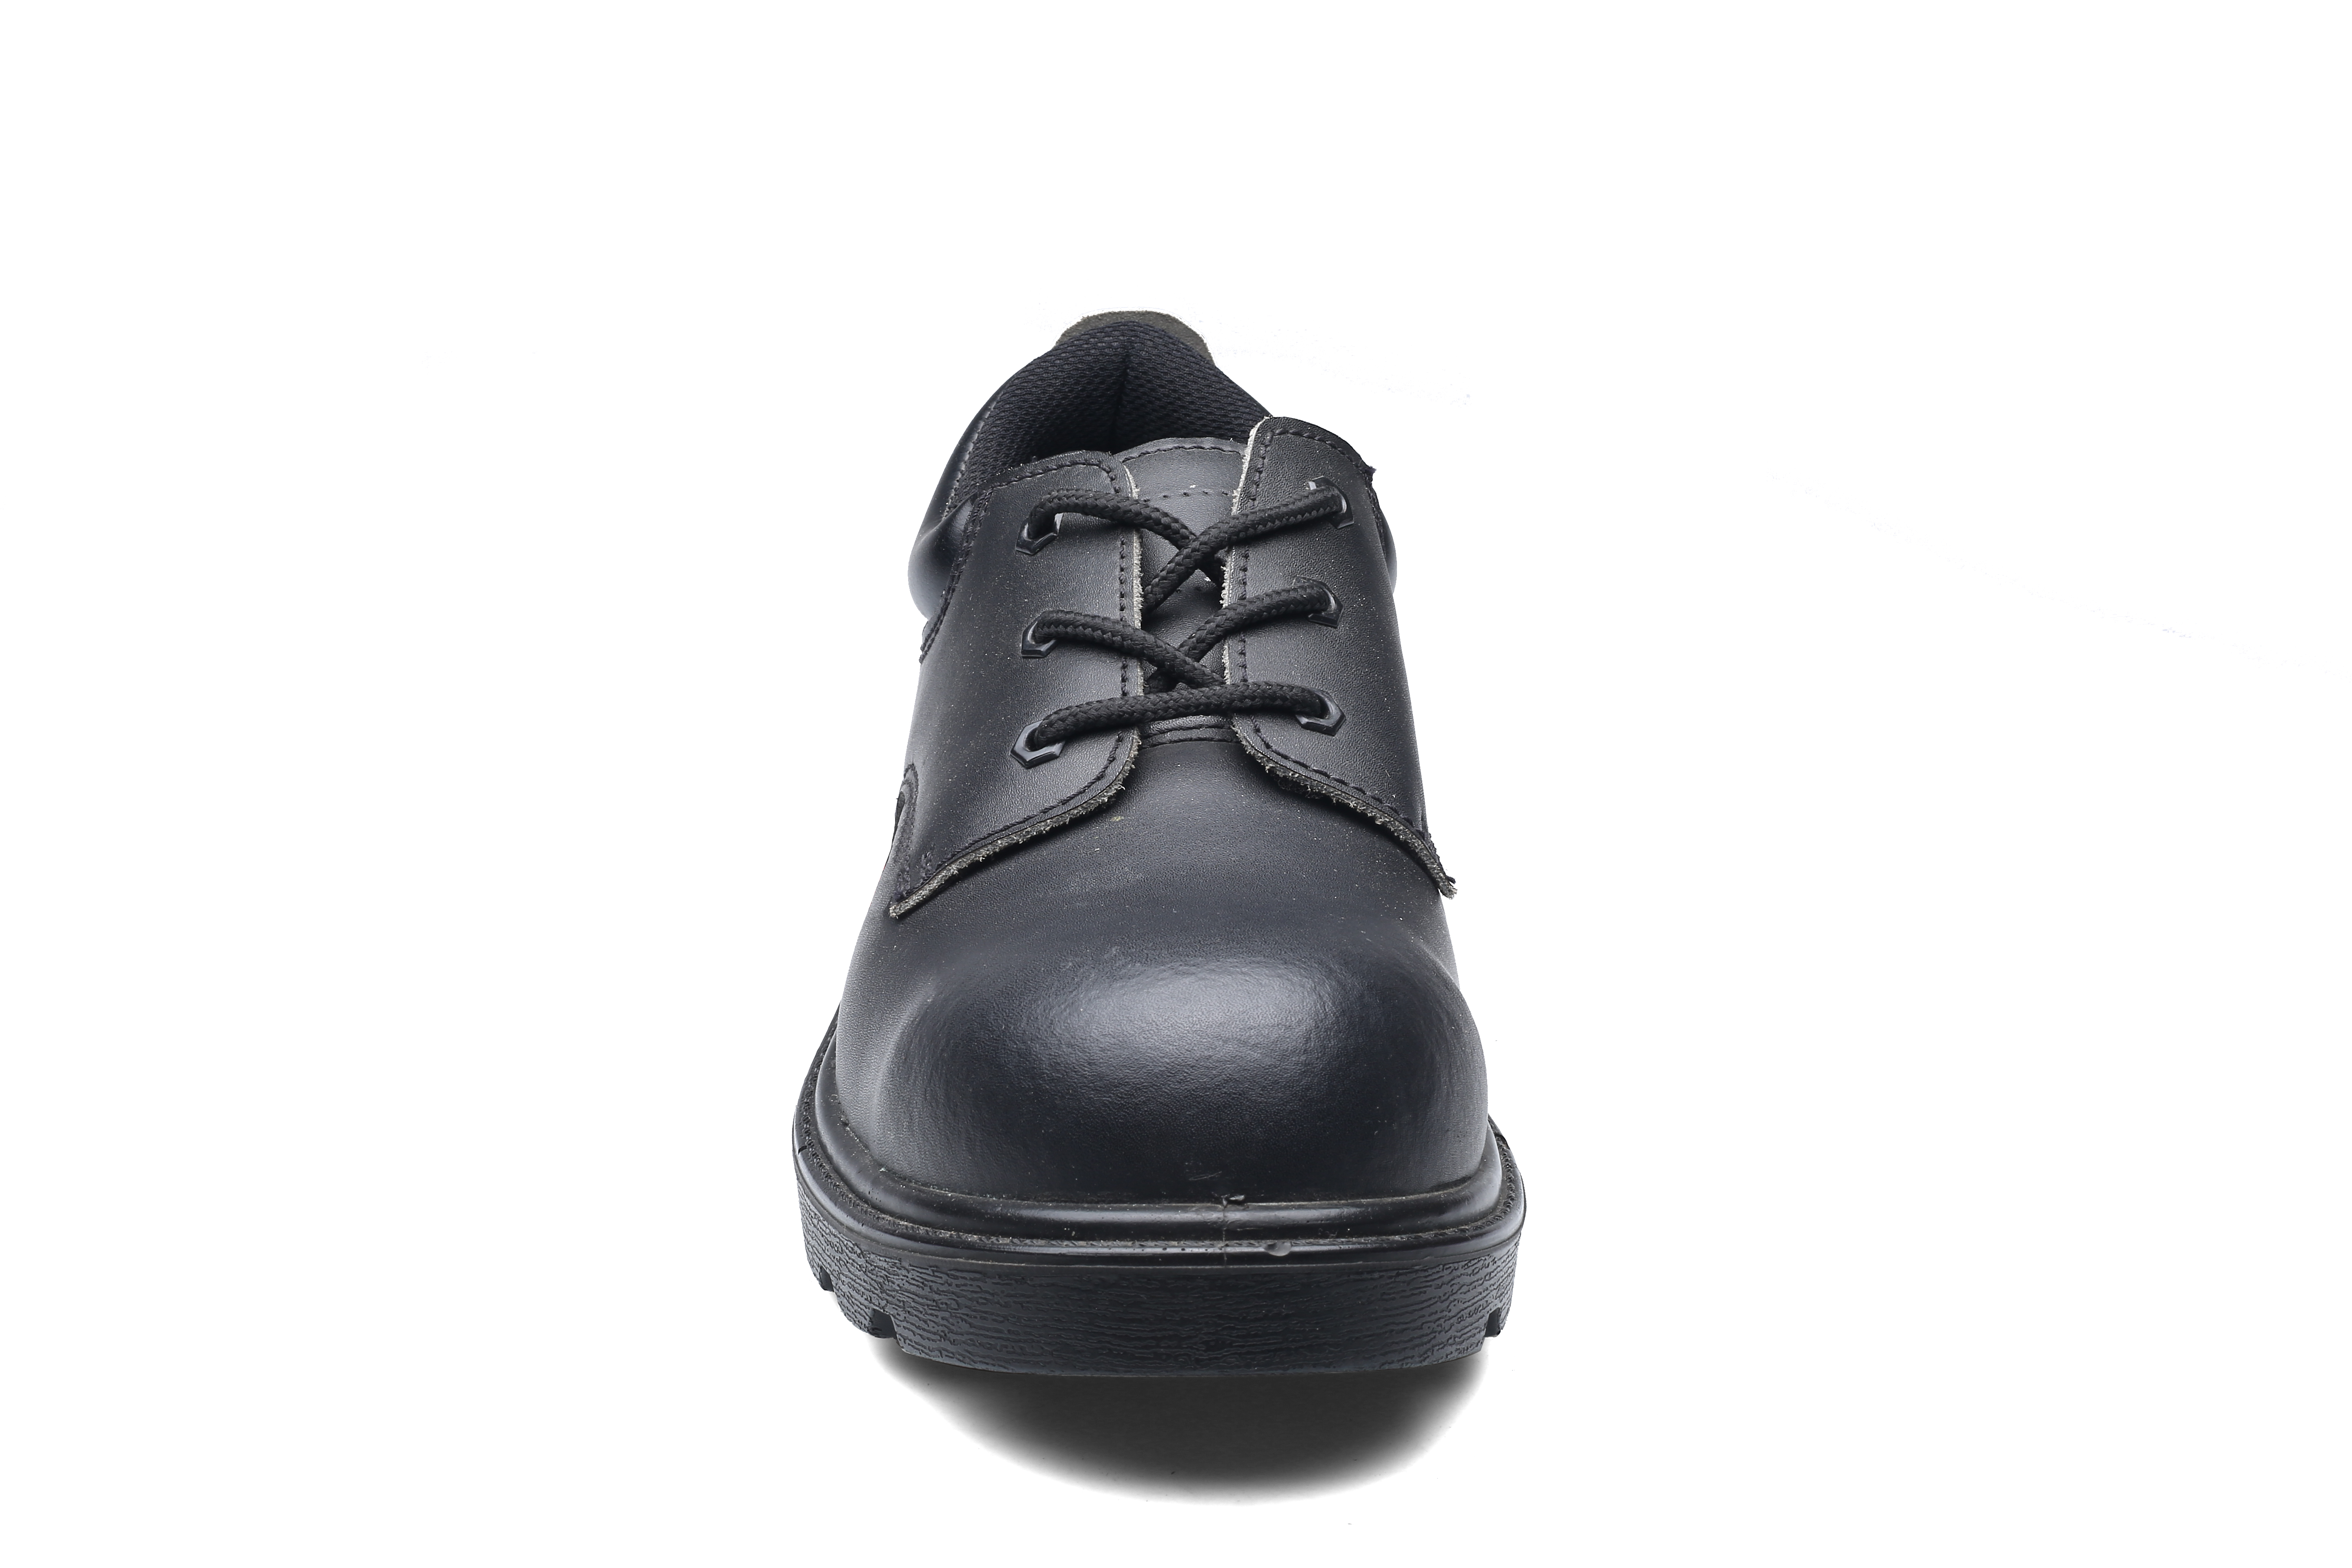 Unisex Office Working Safety Shoes with  lacing up & oil resistant